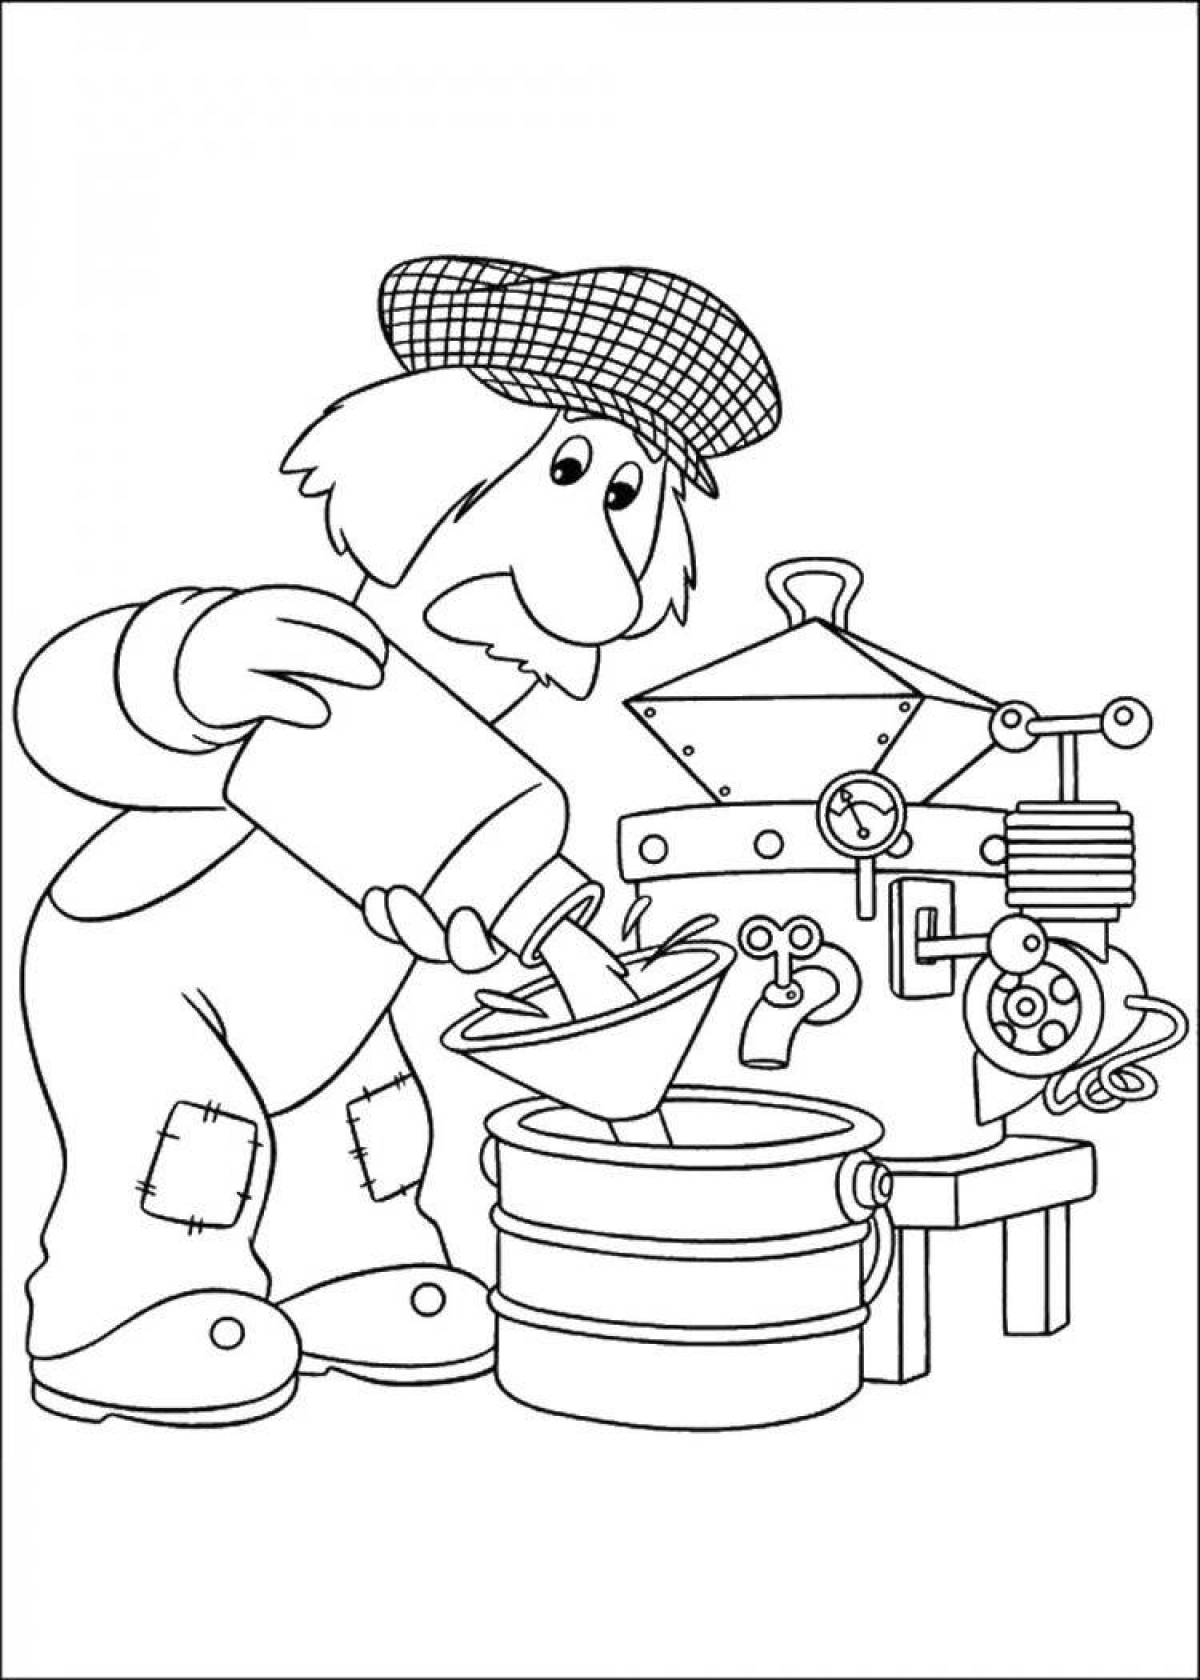 The postman's playful coloring page